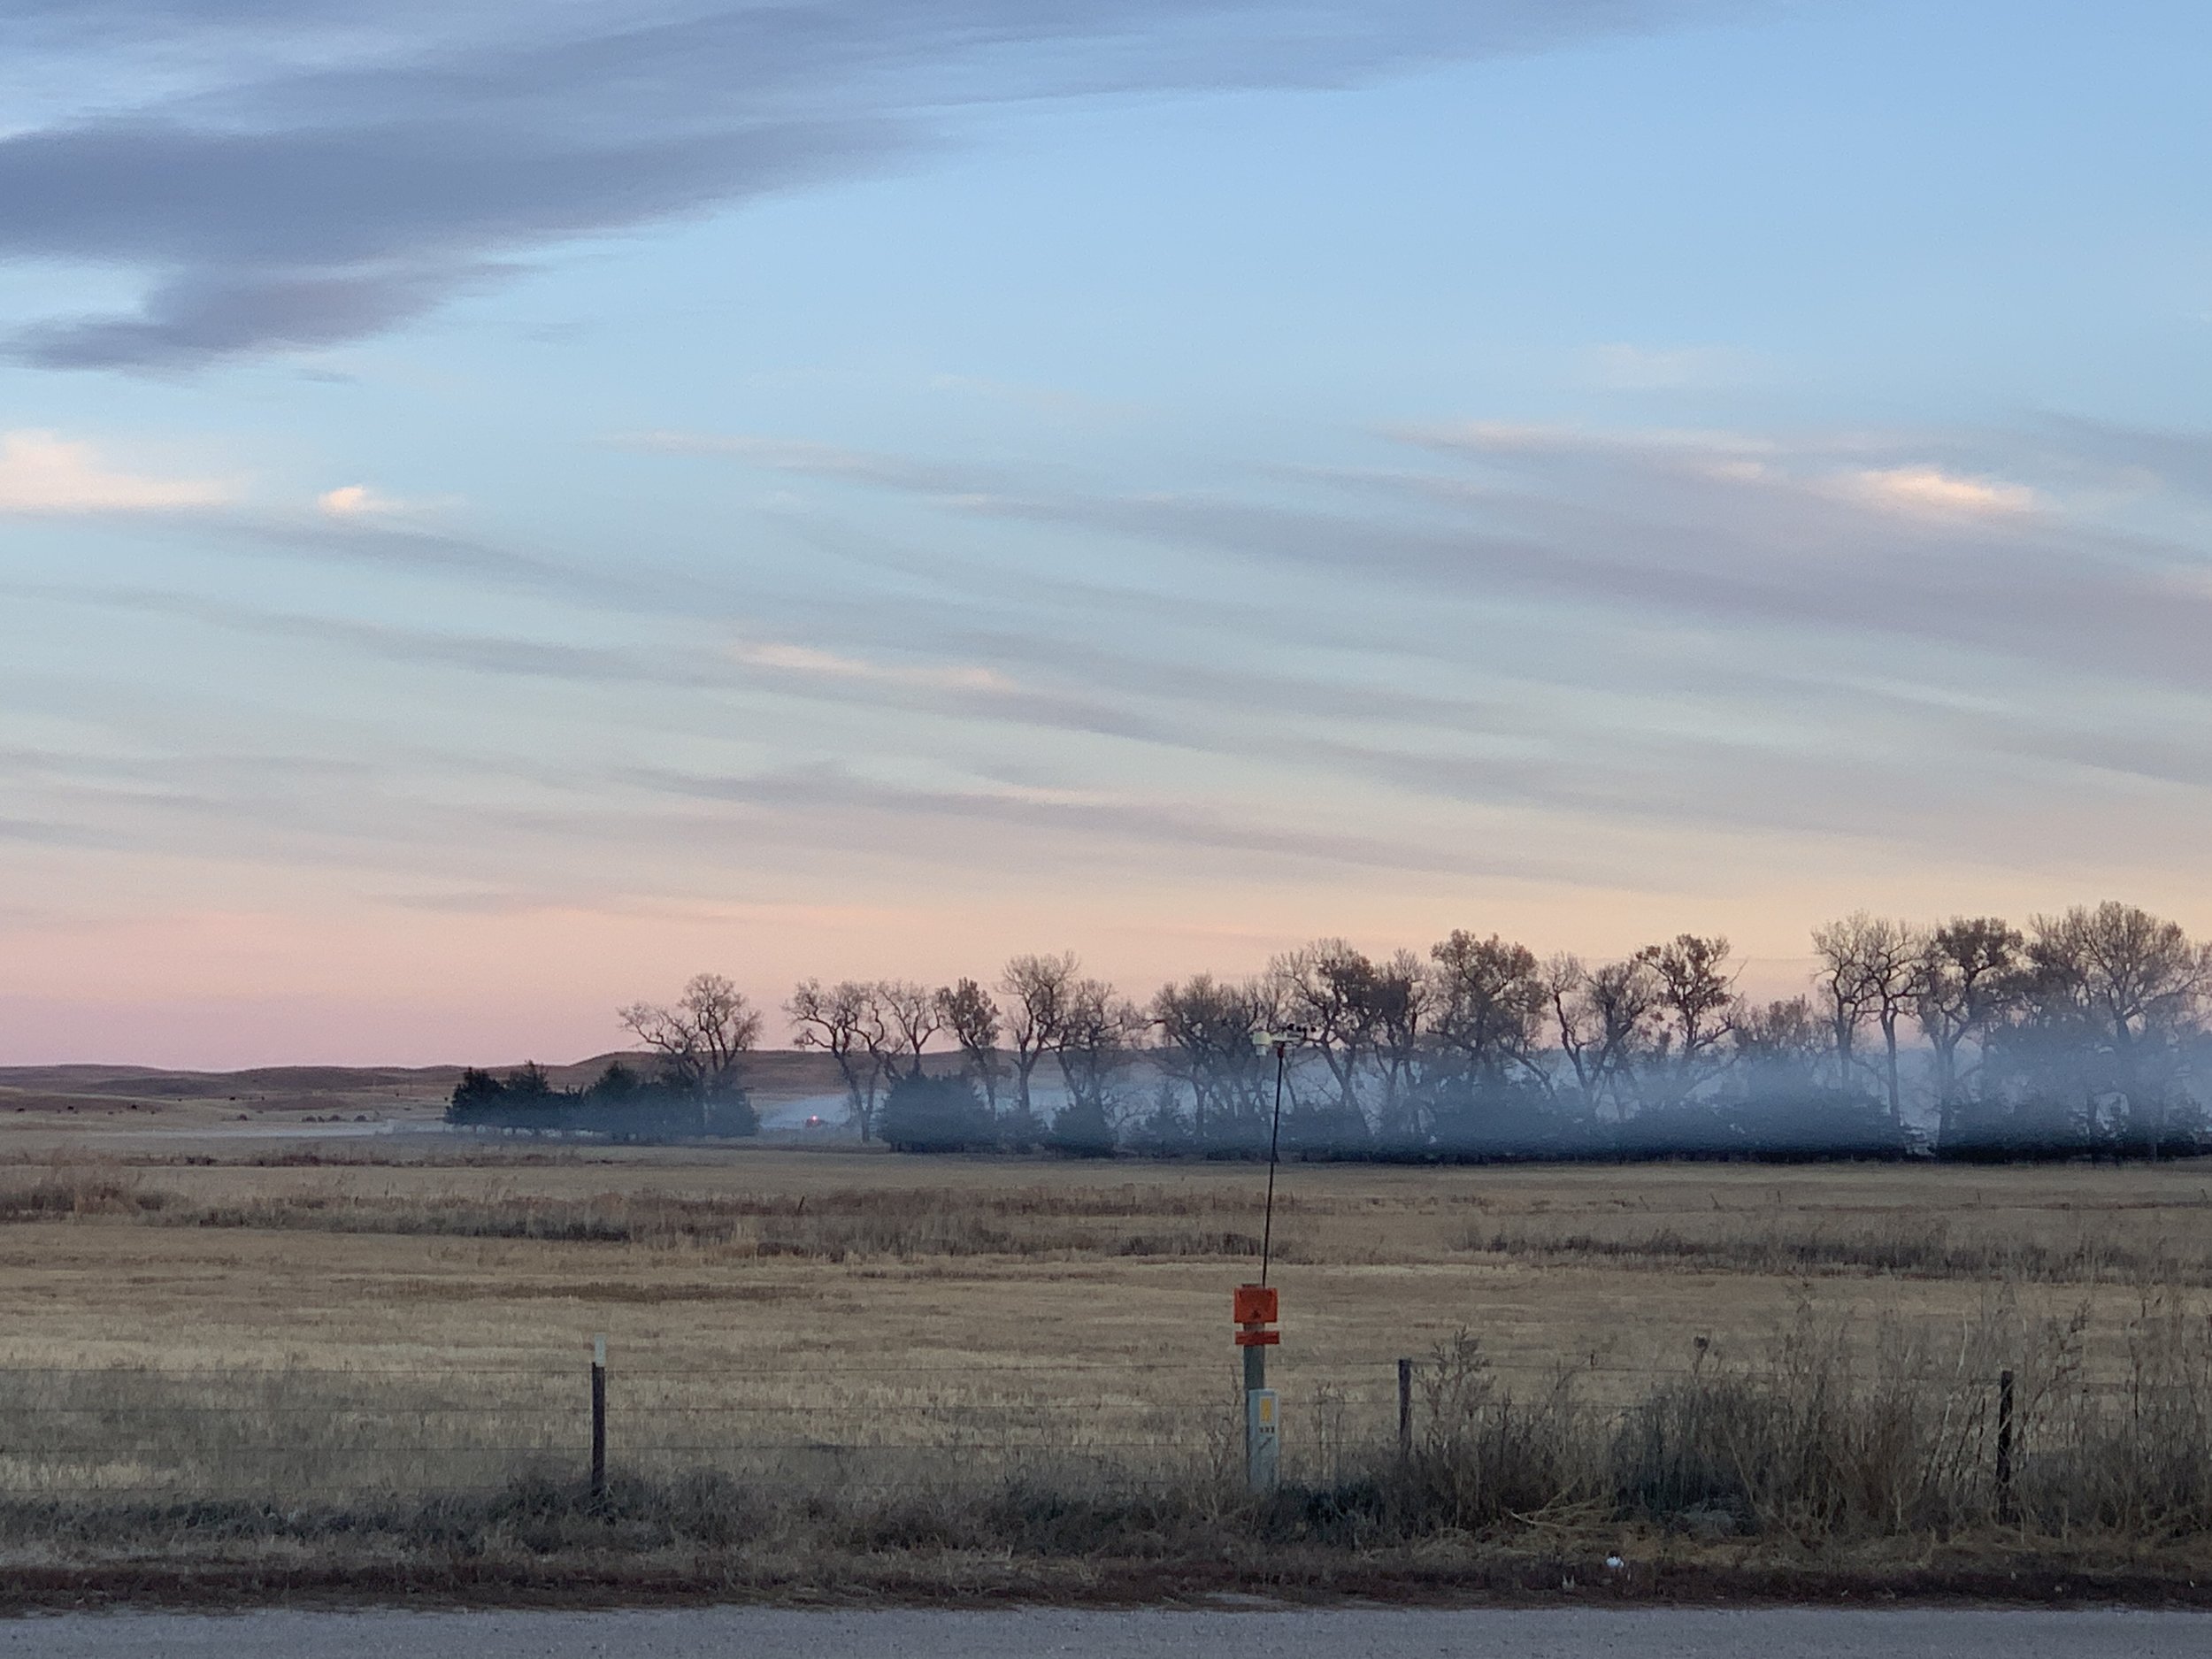  I was planting 300 daffodils in November, took a break on the back of our pickup and looked up to see a fire on the south side of our meadow (just south of where the hay bale was struck this summer). I was in disbelief at what I saw because there wa